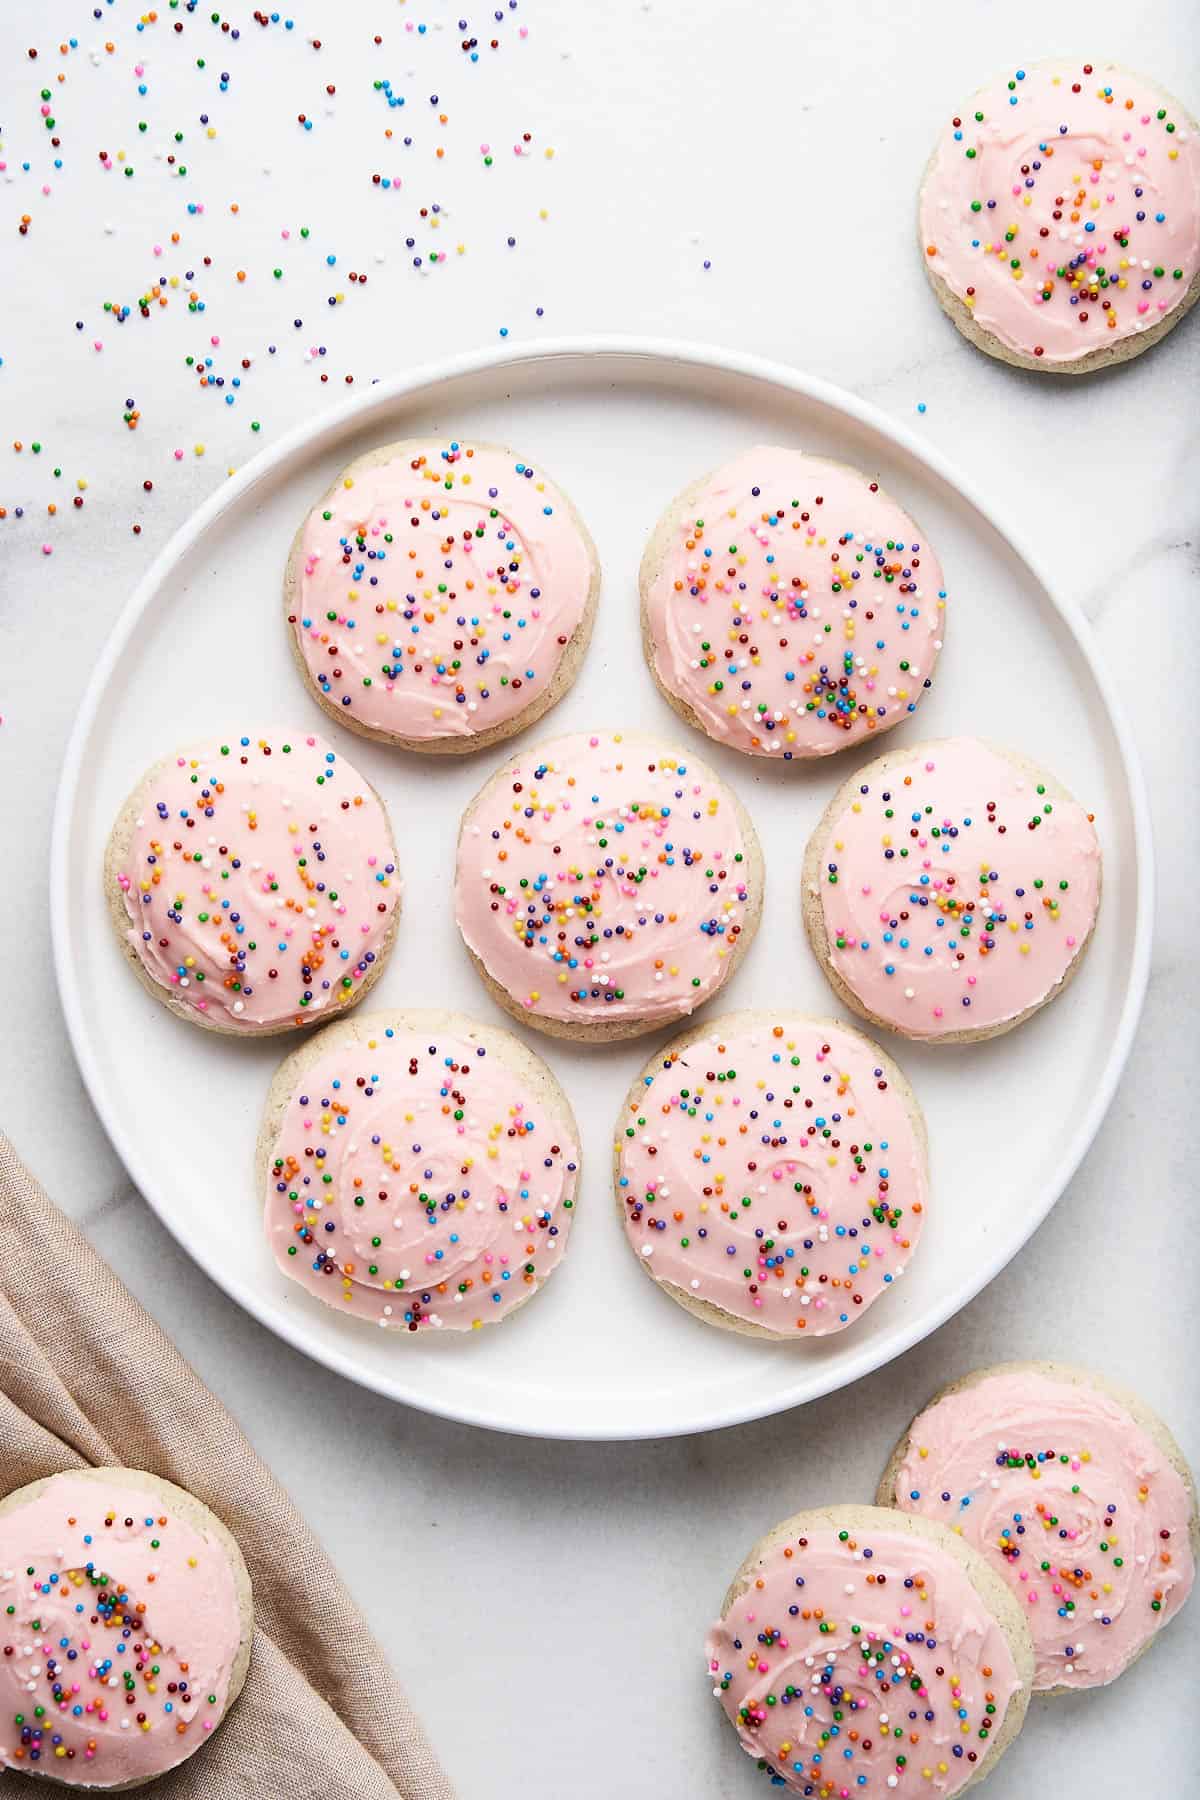 Gluten free sugar cookies on a white plate with more cookies and sprinkles around the plate.